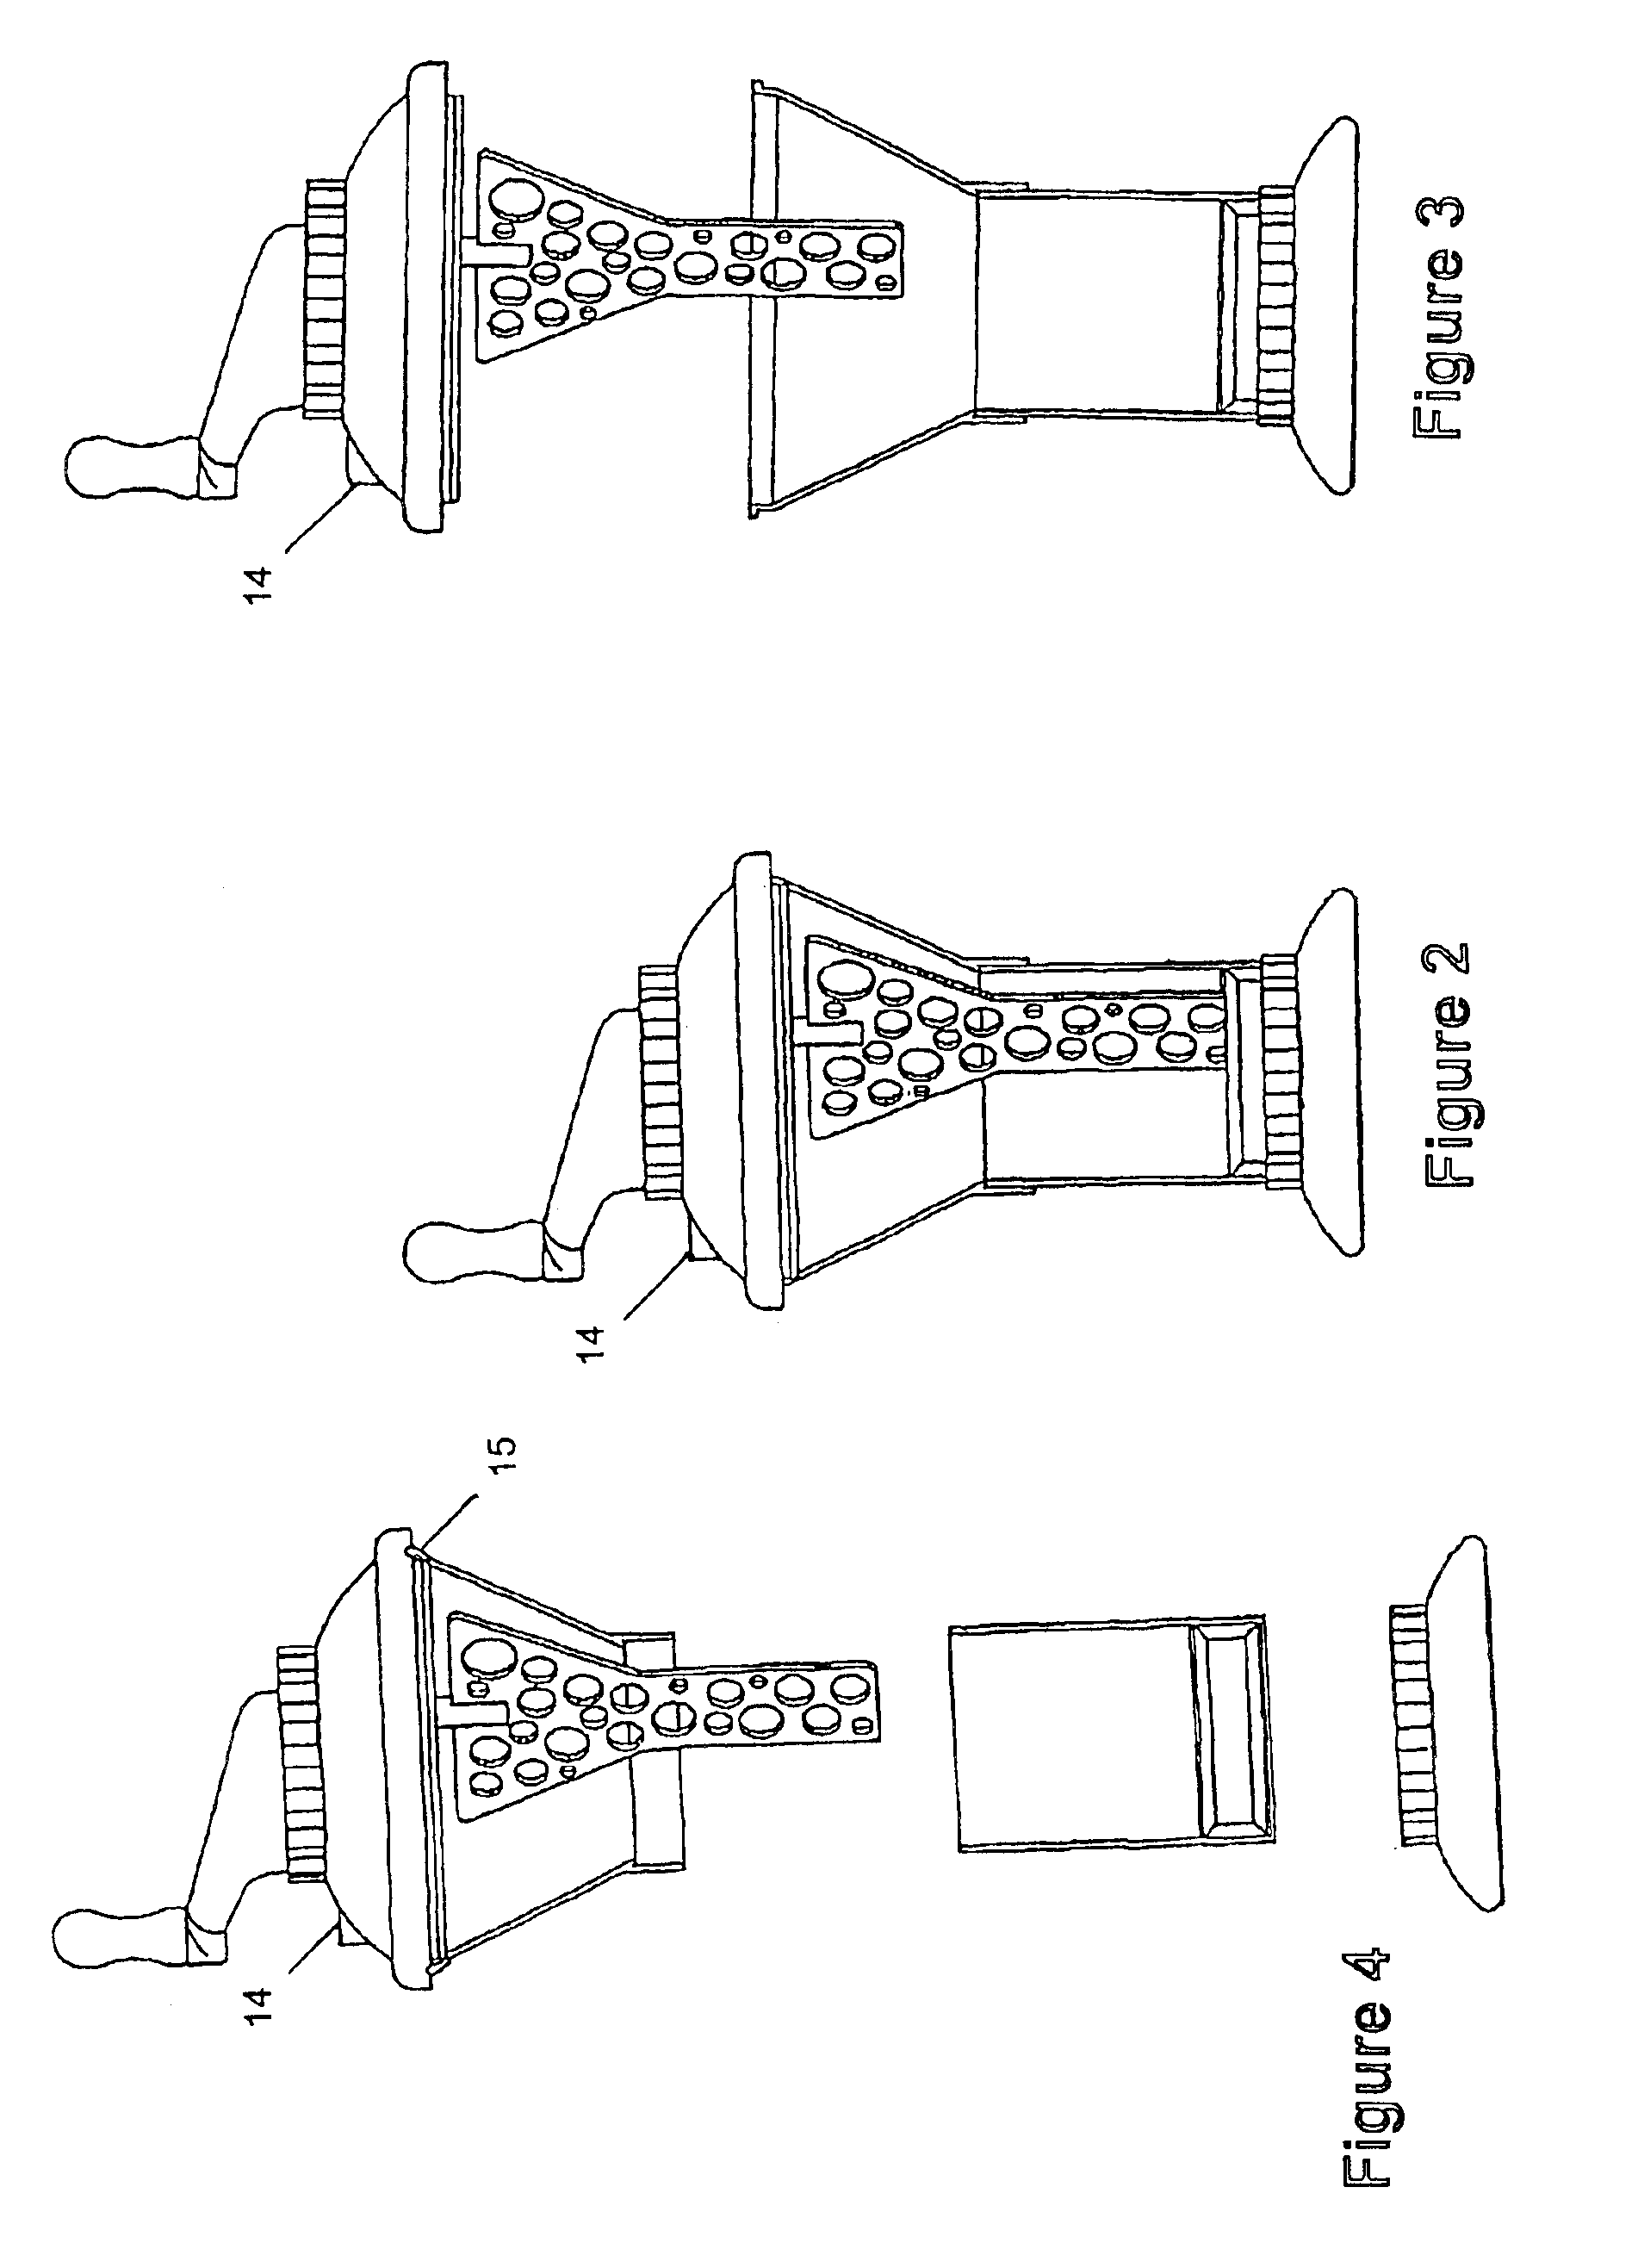 Orthopaedic cement mixing and dispensing device